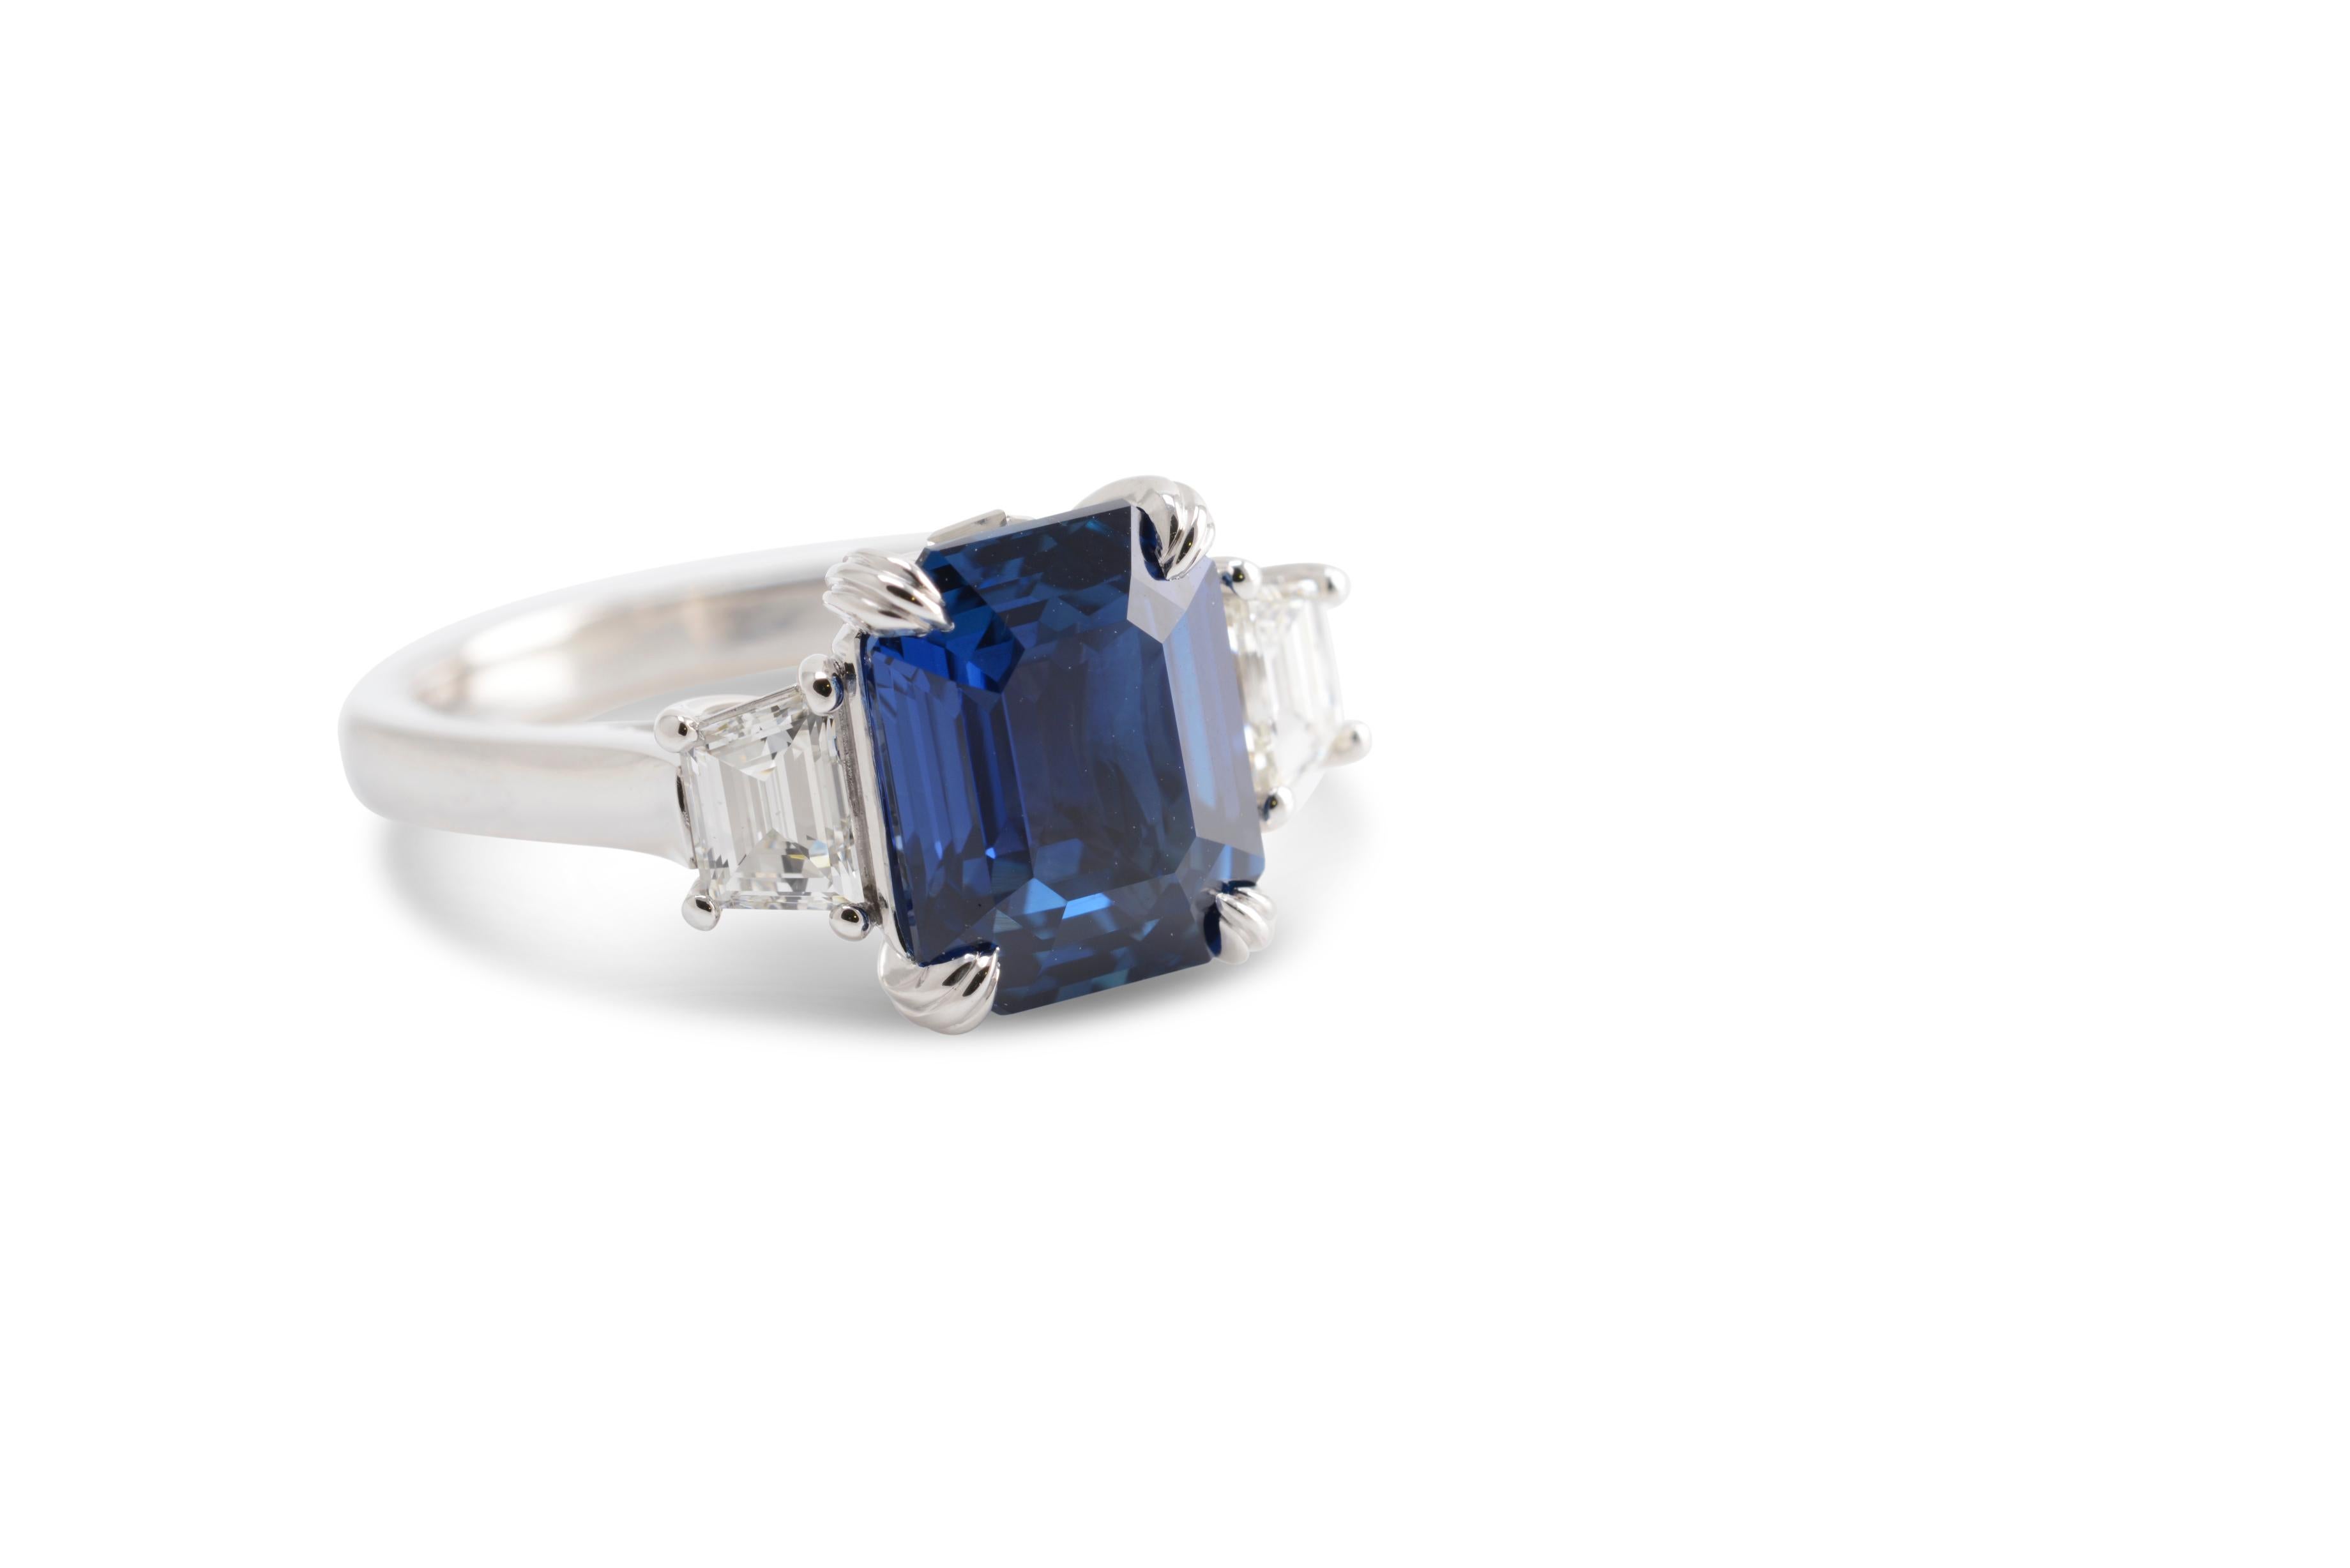 5.12 Carat Natural Emerald Cut Vivid Blue Sapphire and Diamond Three-Stone Ring In New Condition For Sale In Sydney, NSW